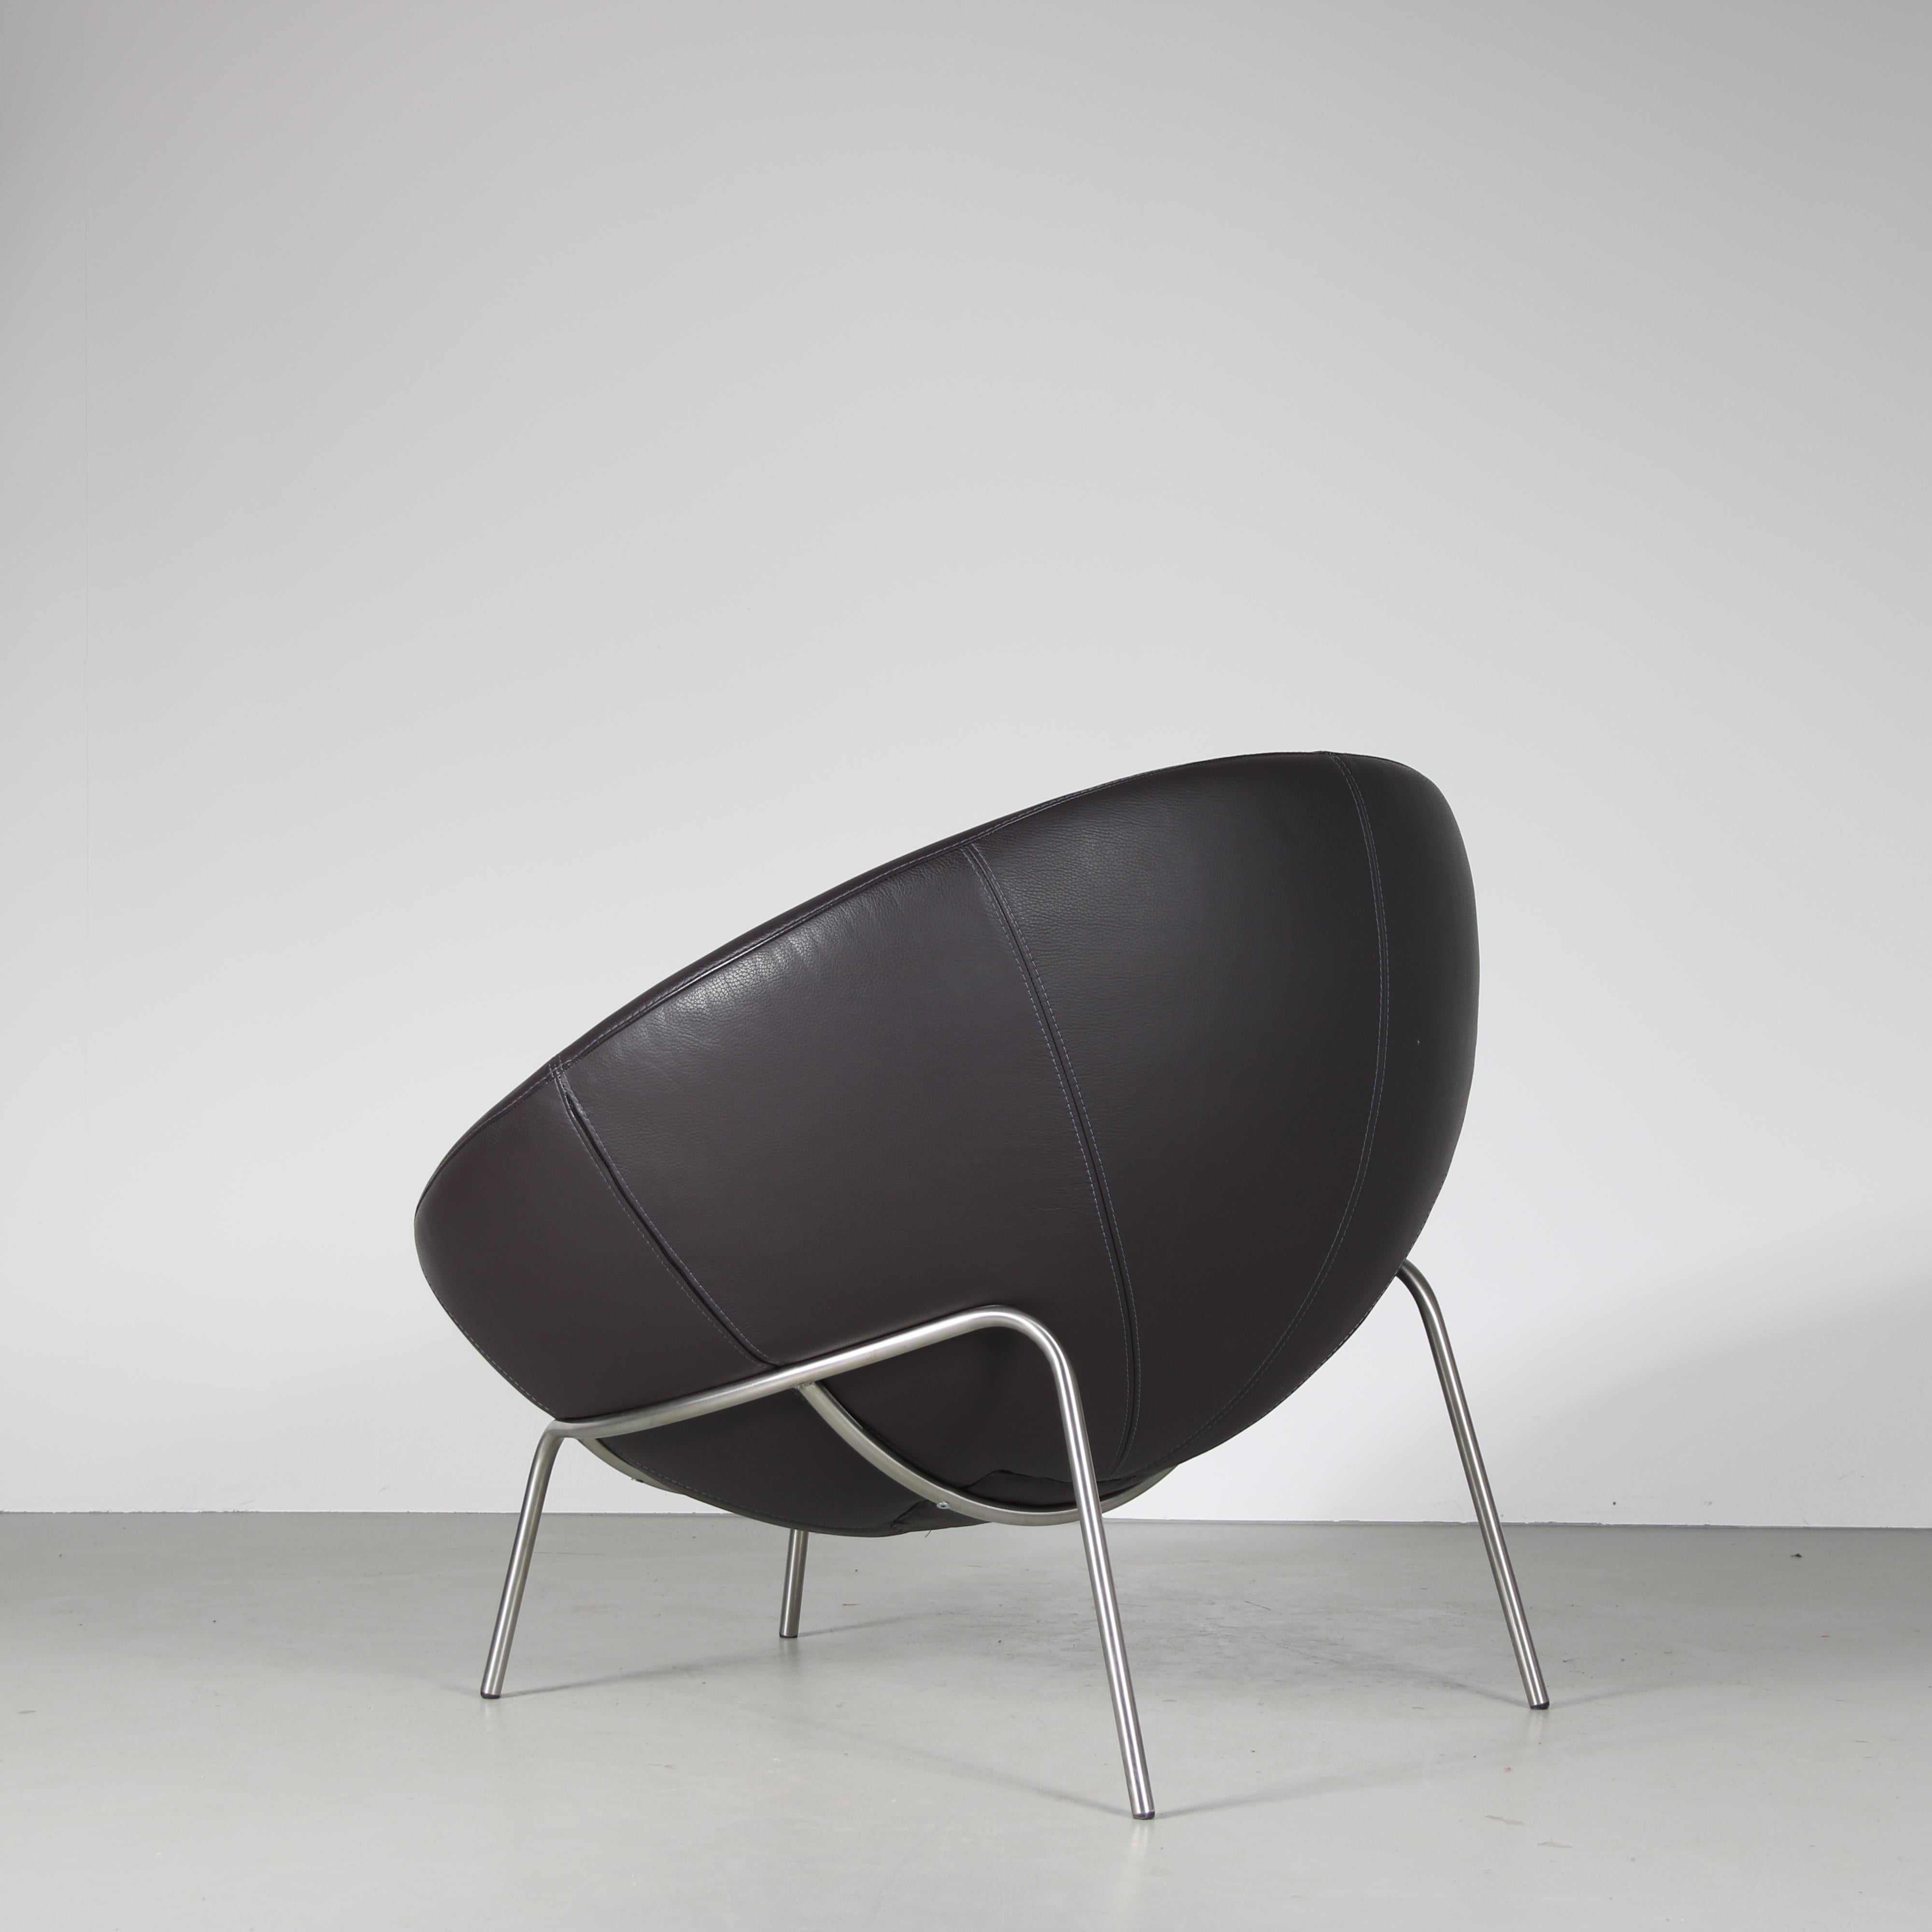 Contemporary Lounge Chair by Bert Plantagie from the Netherlands, 2000s